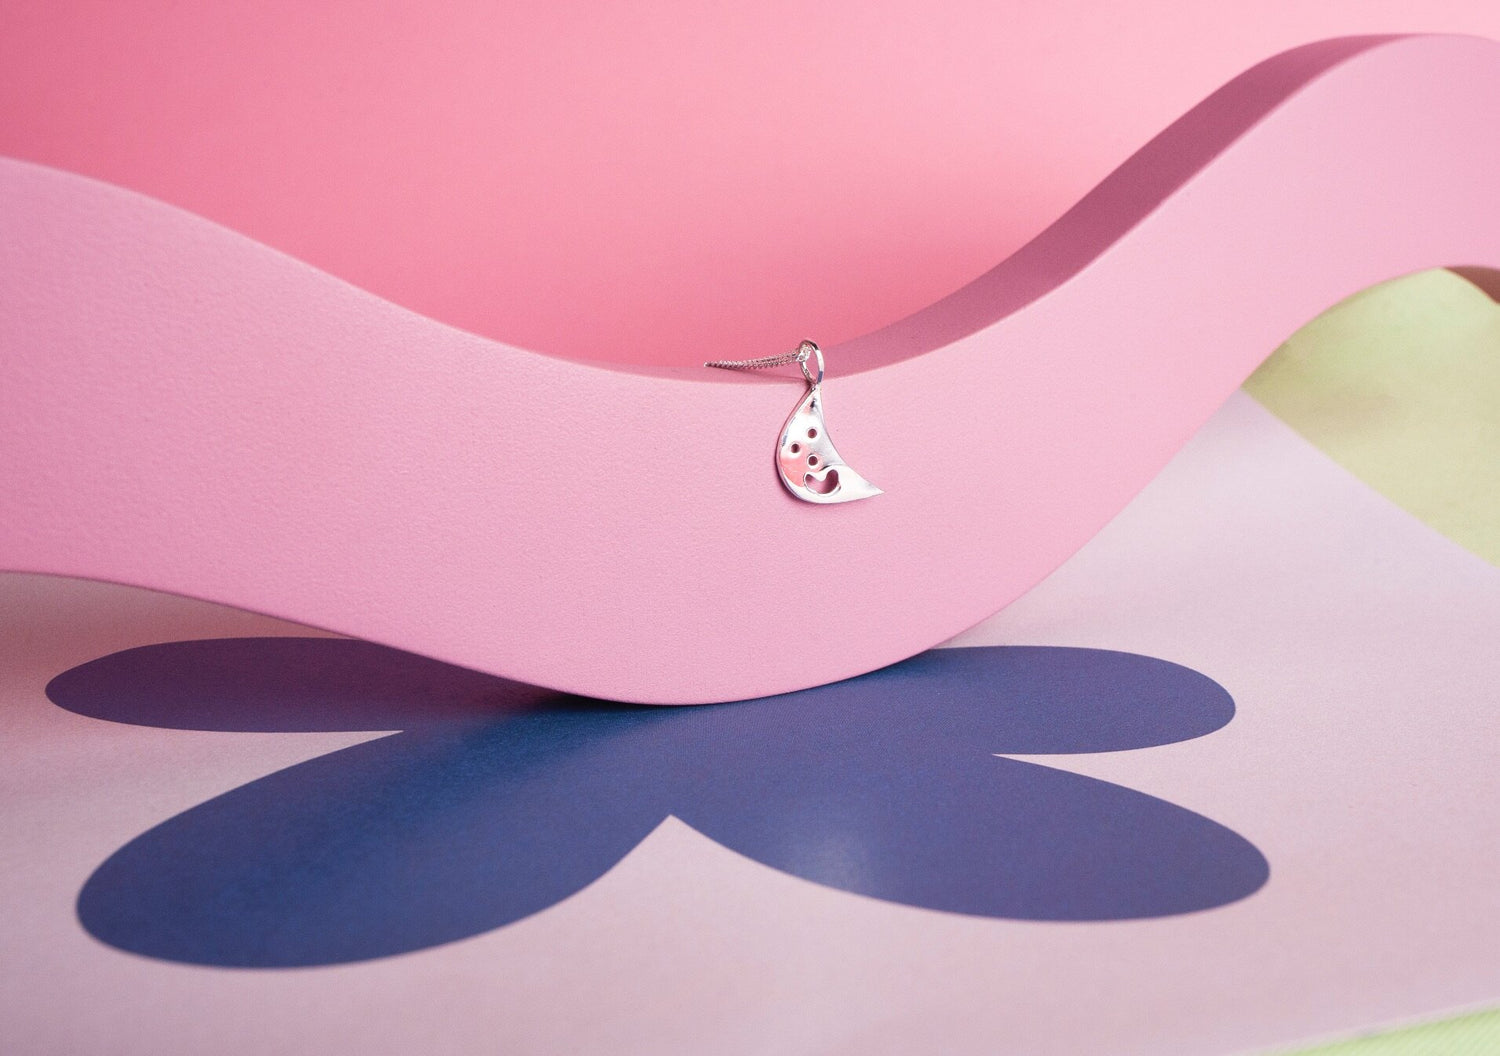 A small silver moon shaped charm on a chain. The charm has a smiley face cut into it. The necklace is hanging over a pink abstract shape and there is a large purple flower shape printed n the table.